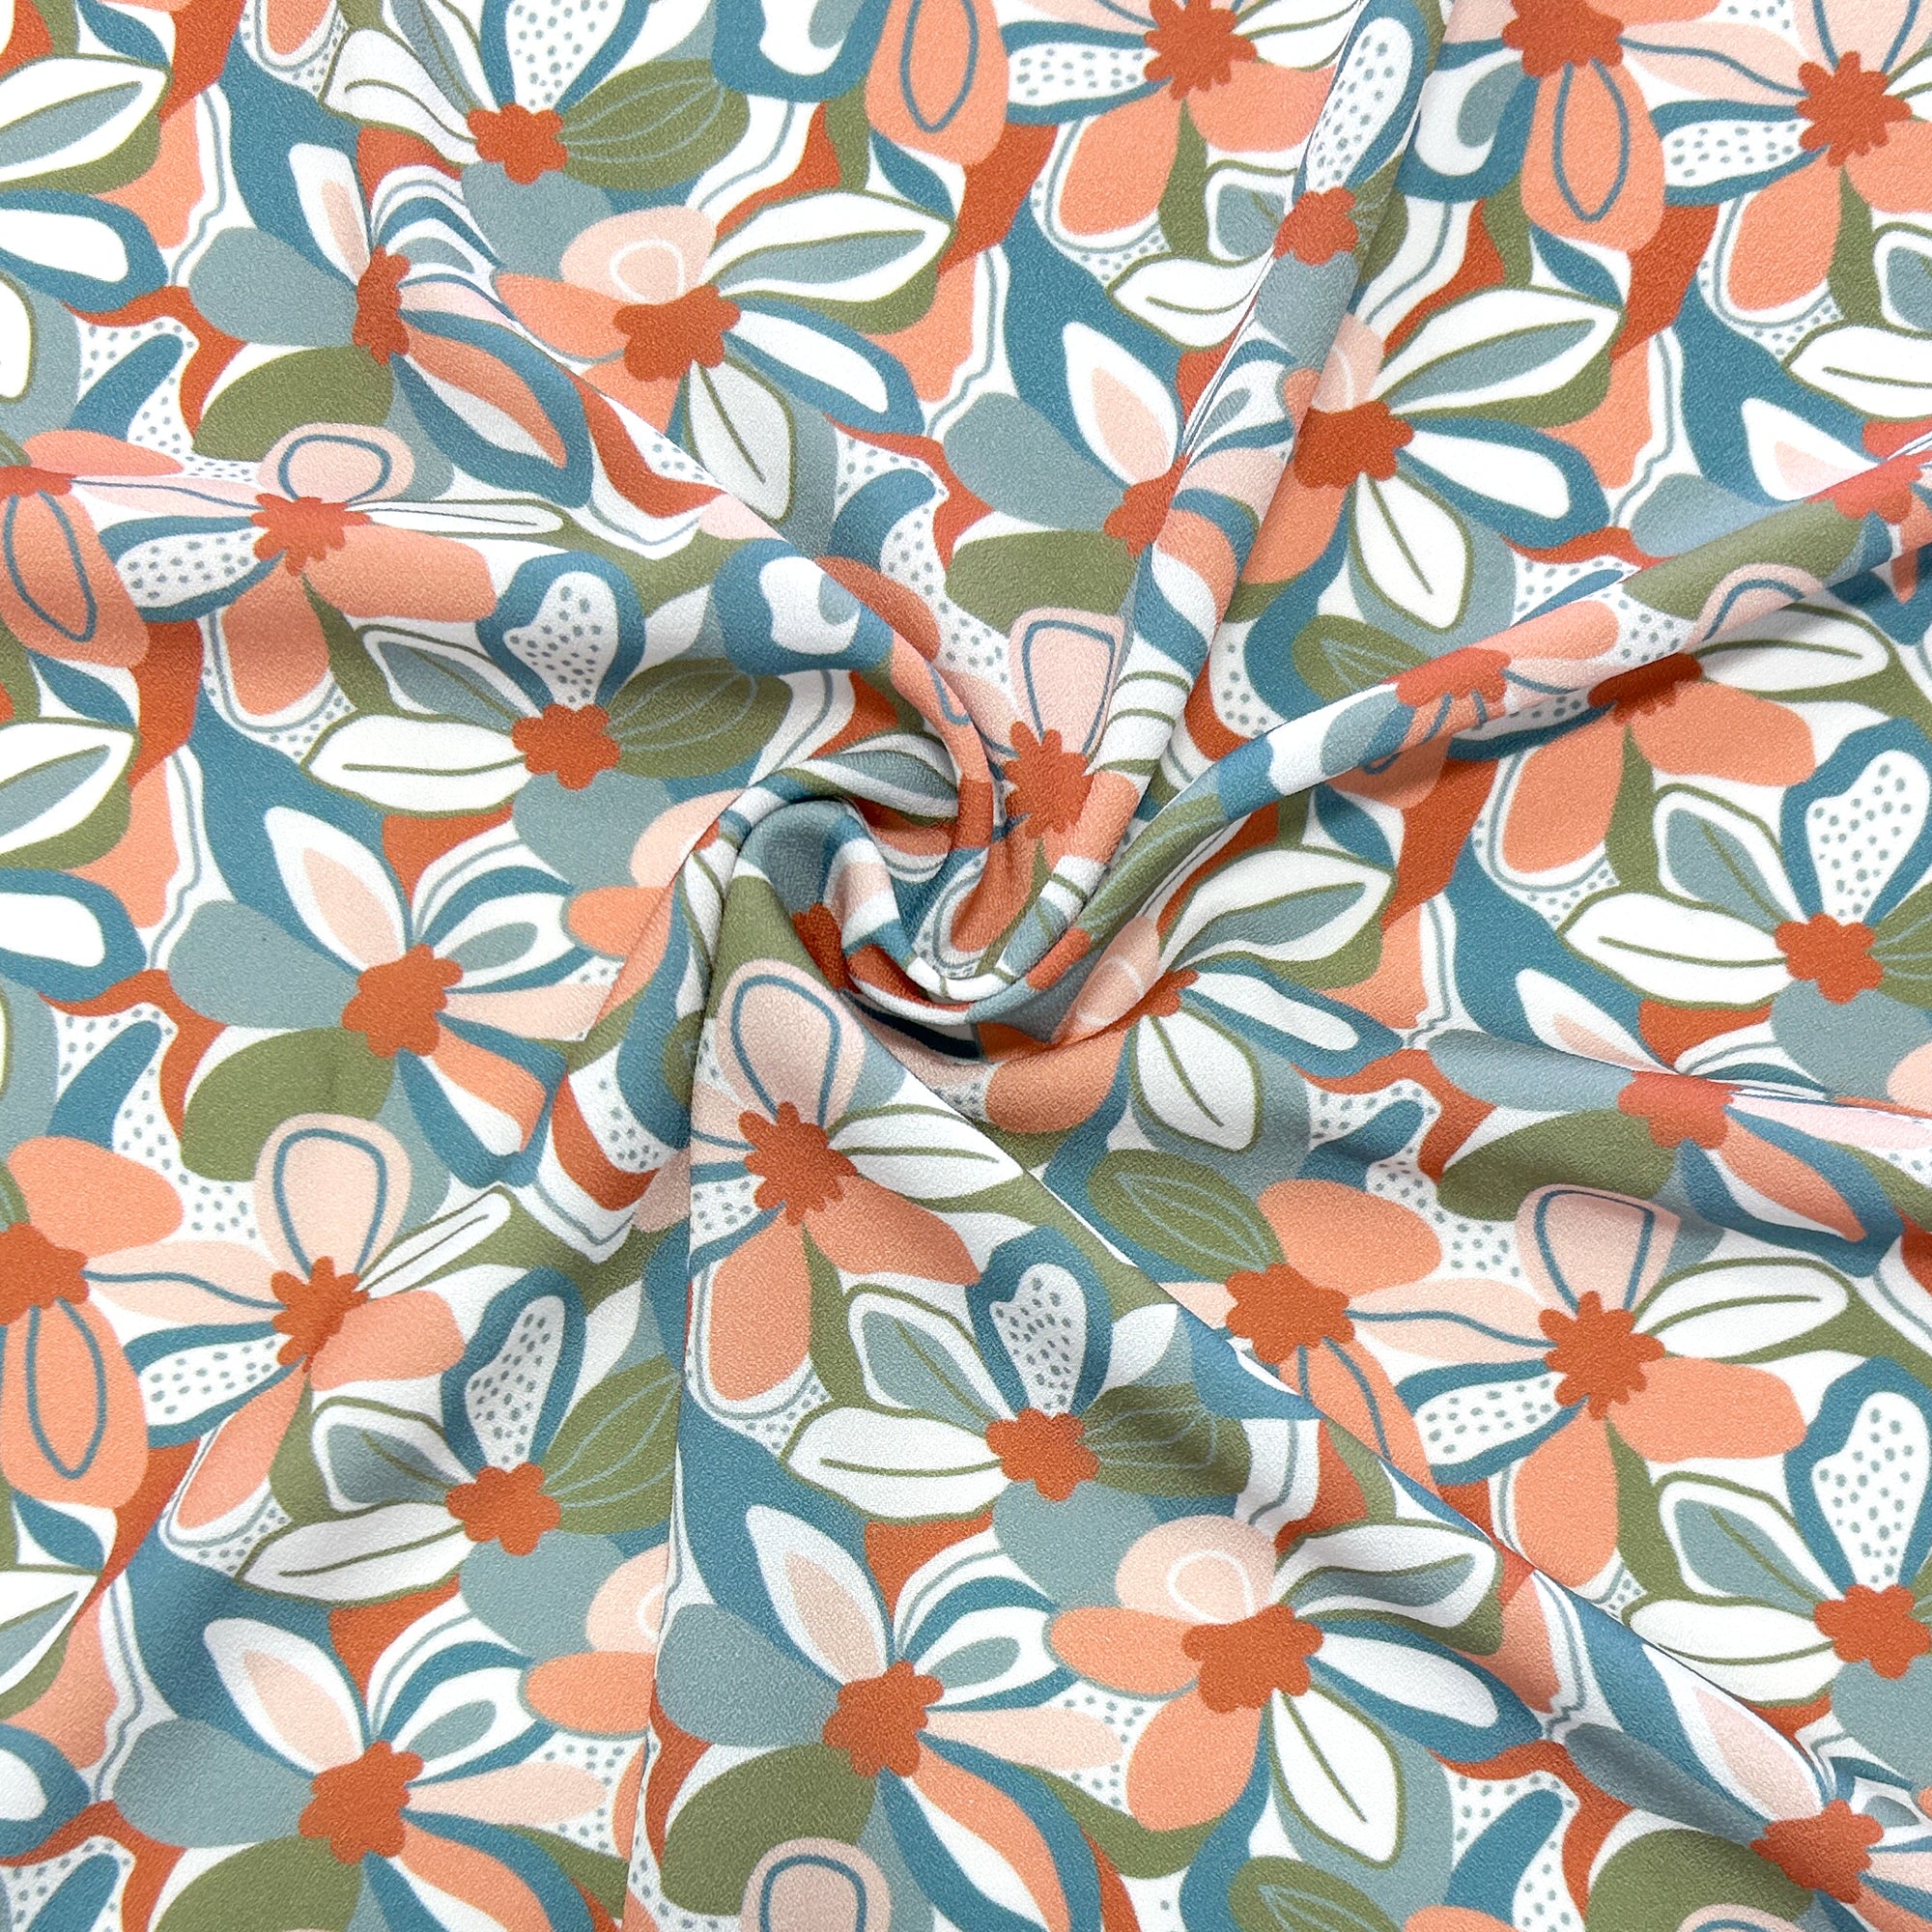 Coral Dusty Blue Ruse and Light Olive Floral Print Stretch Crepe, CLUB Fabrics